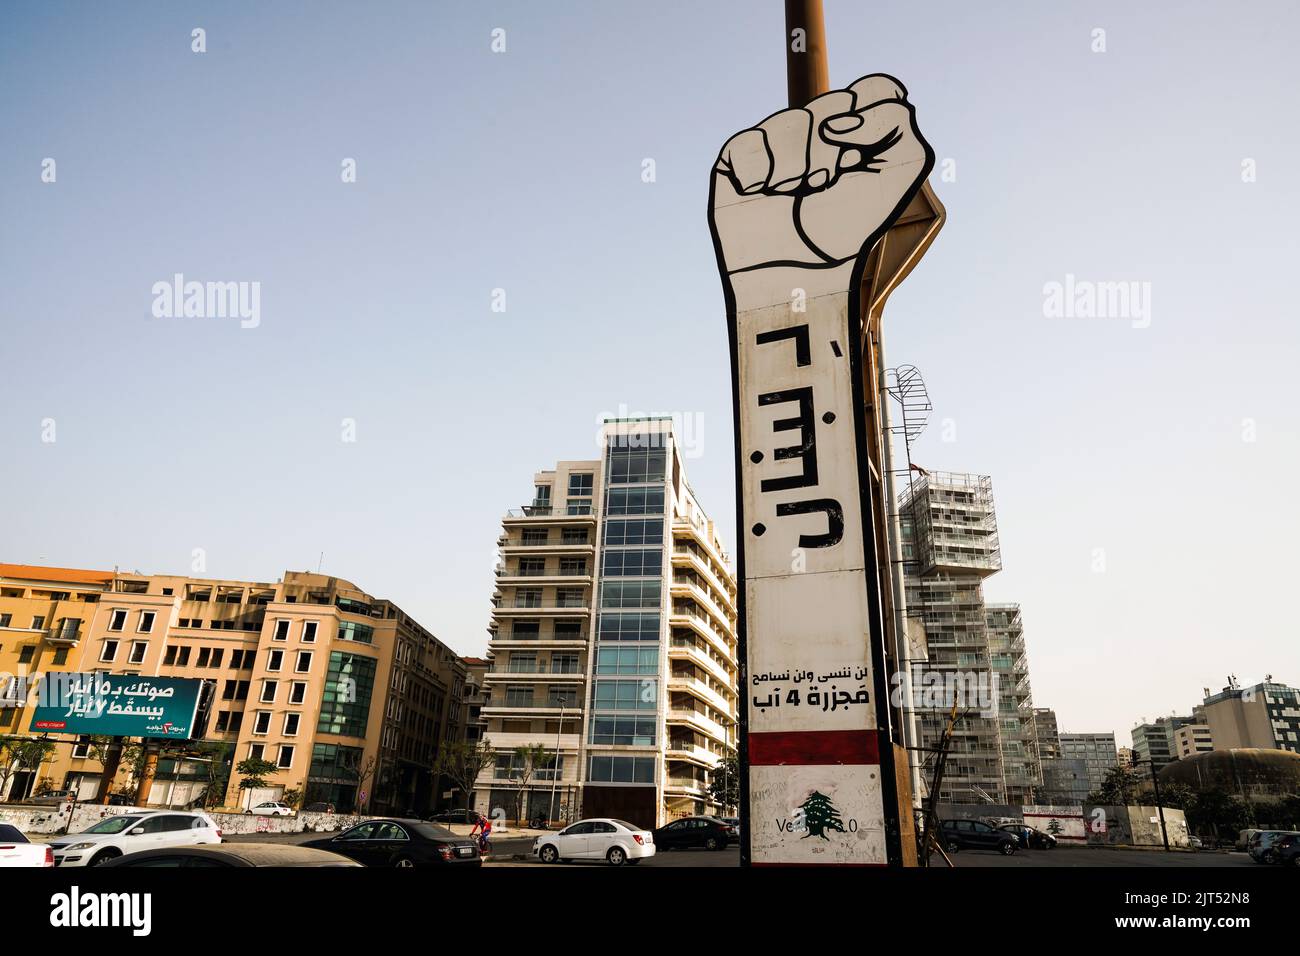 Beirut, Lebanon: Fist of the Revolution in Martyrs' Square in the city of Beirut Stock Photo